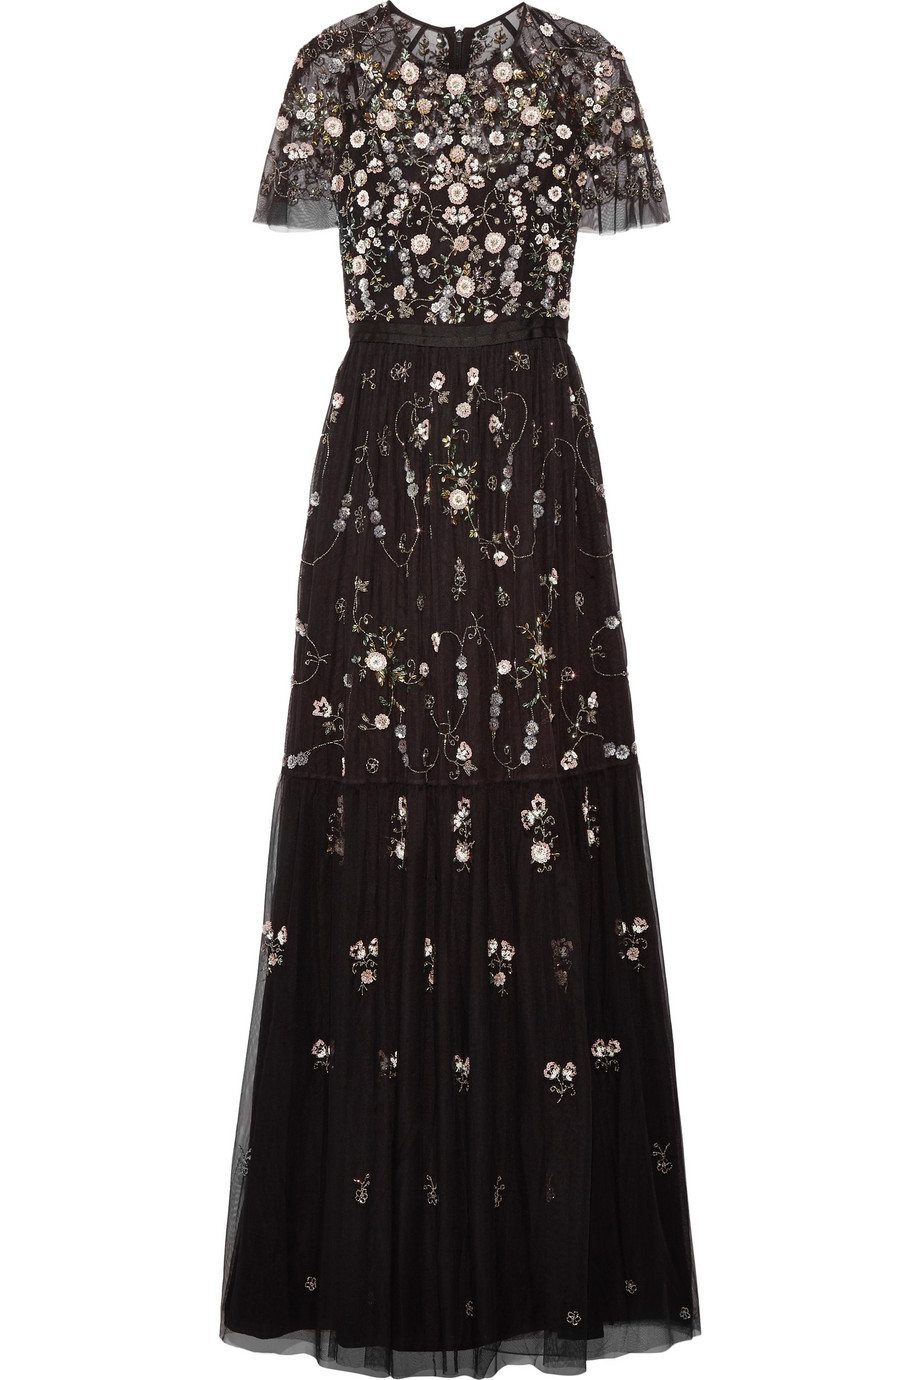 Black embellished floral Needle and Thread gown flat lay